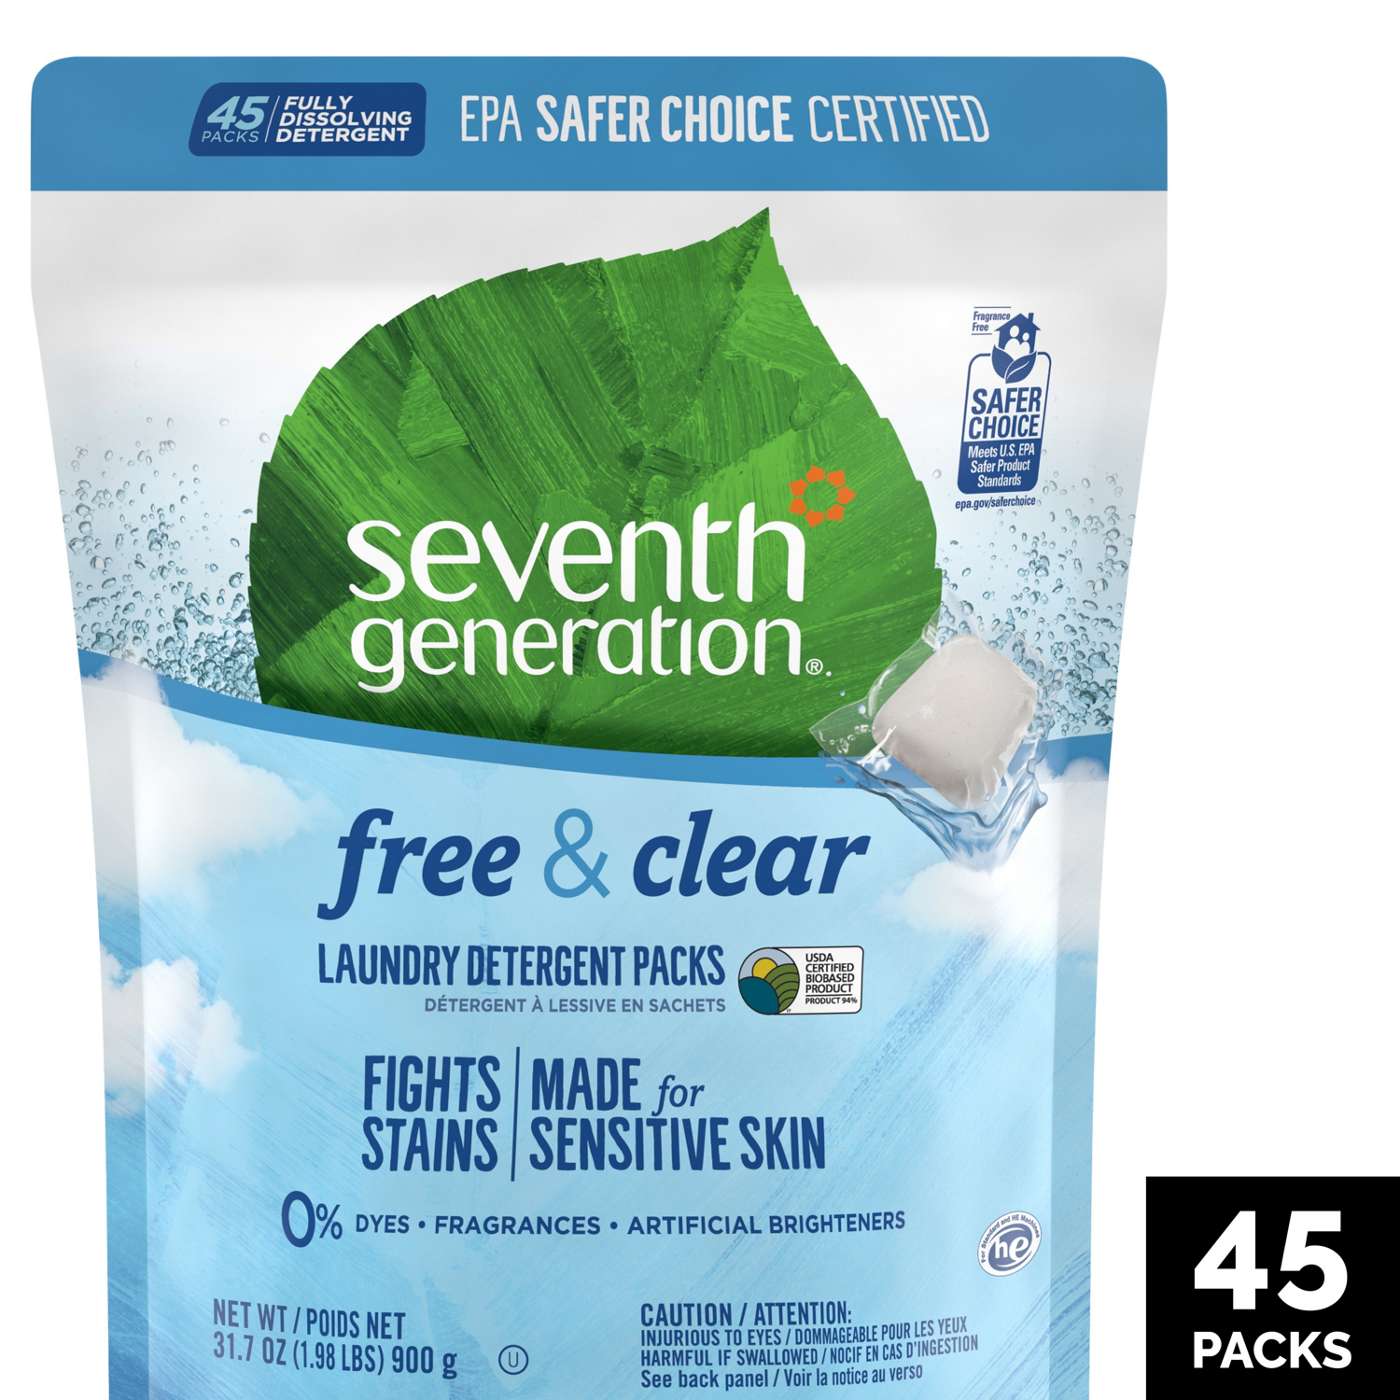 Seventh Generation Free & Clear HE Laundry Detergent Packs; image 6 of 6